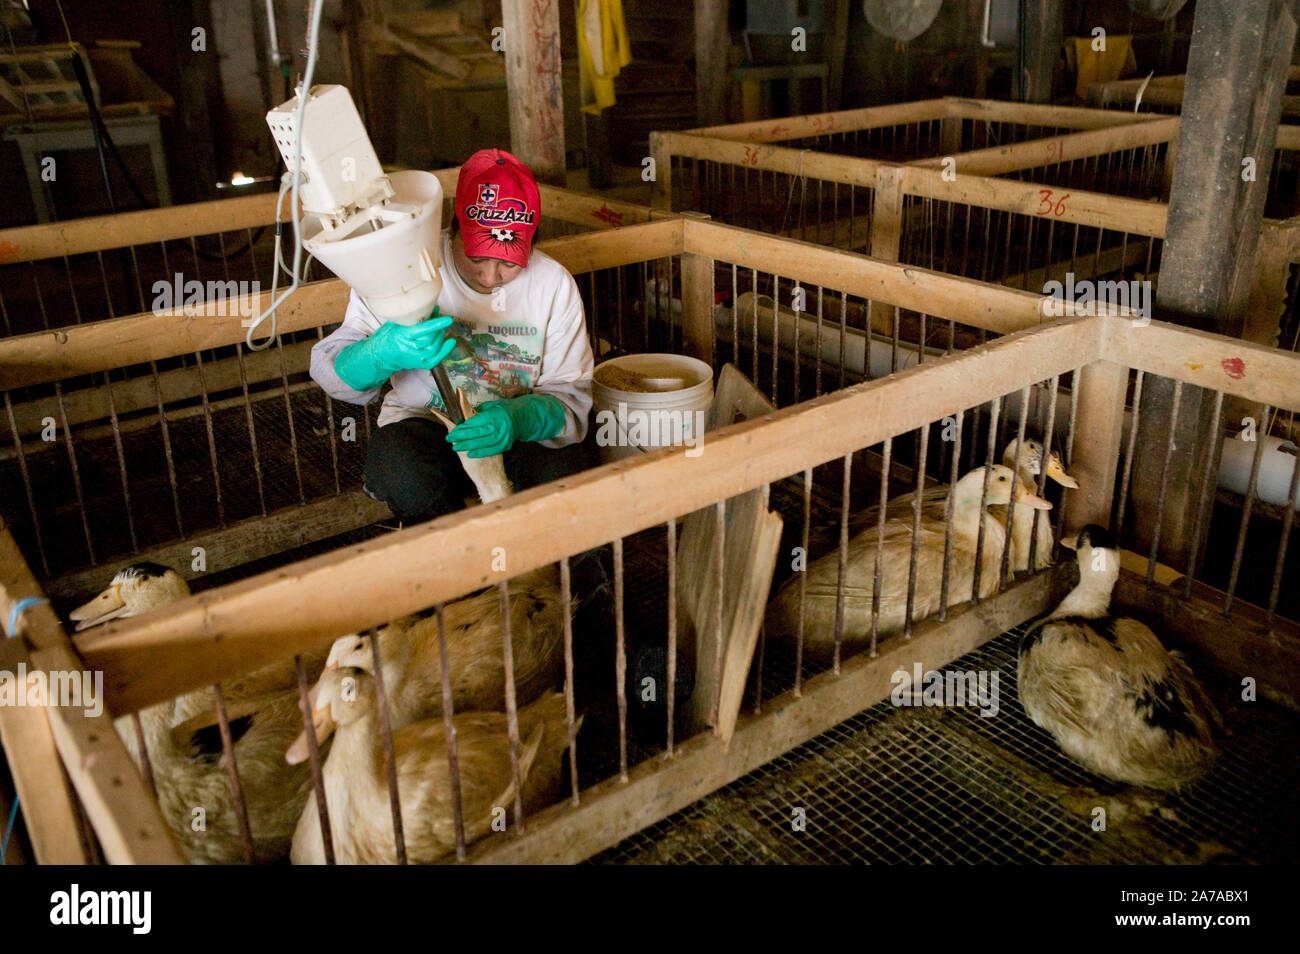 A worker force-feeds a duck at the Hudson Valley Foie Gras farm in Ferndale, USA, 16 March 2006. Stock Photo